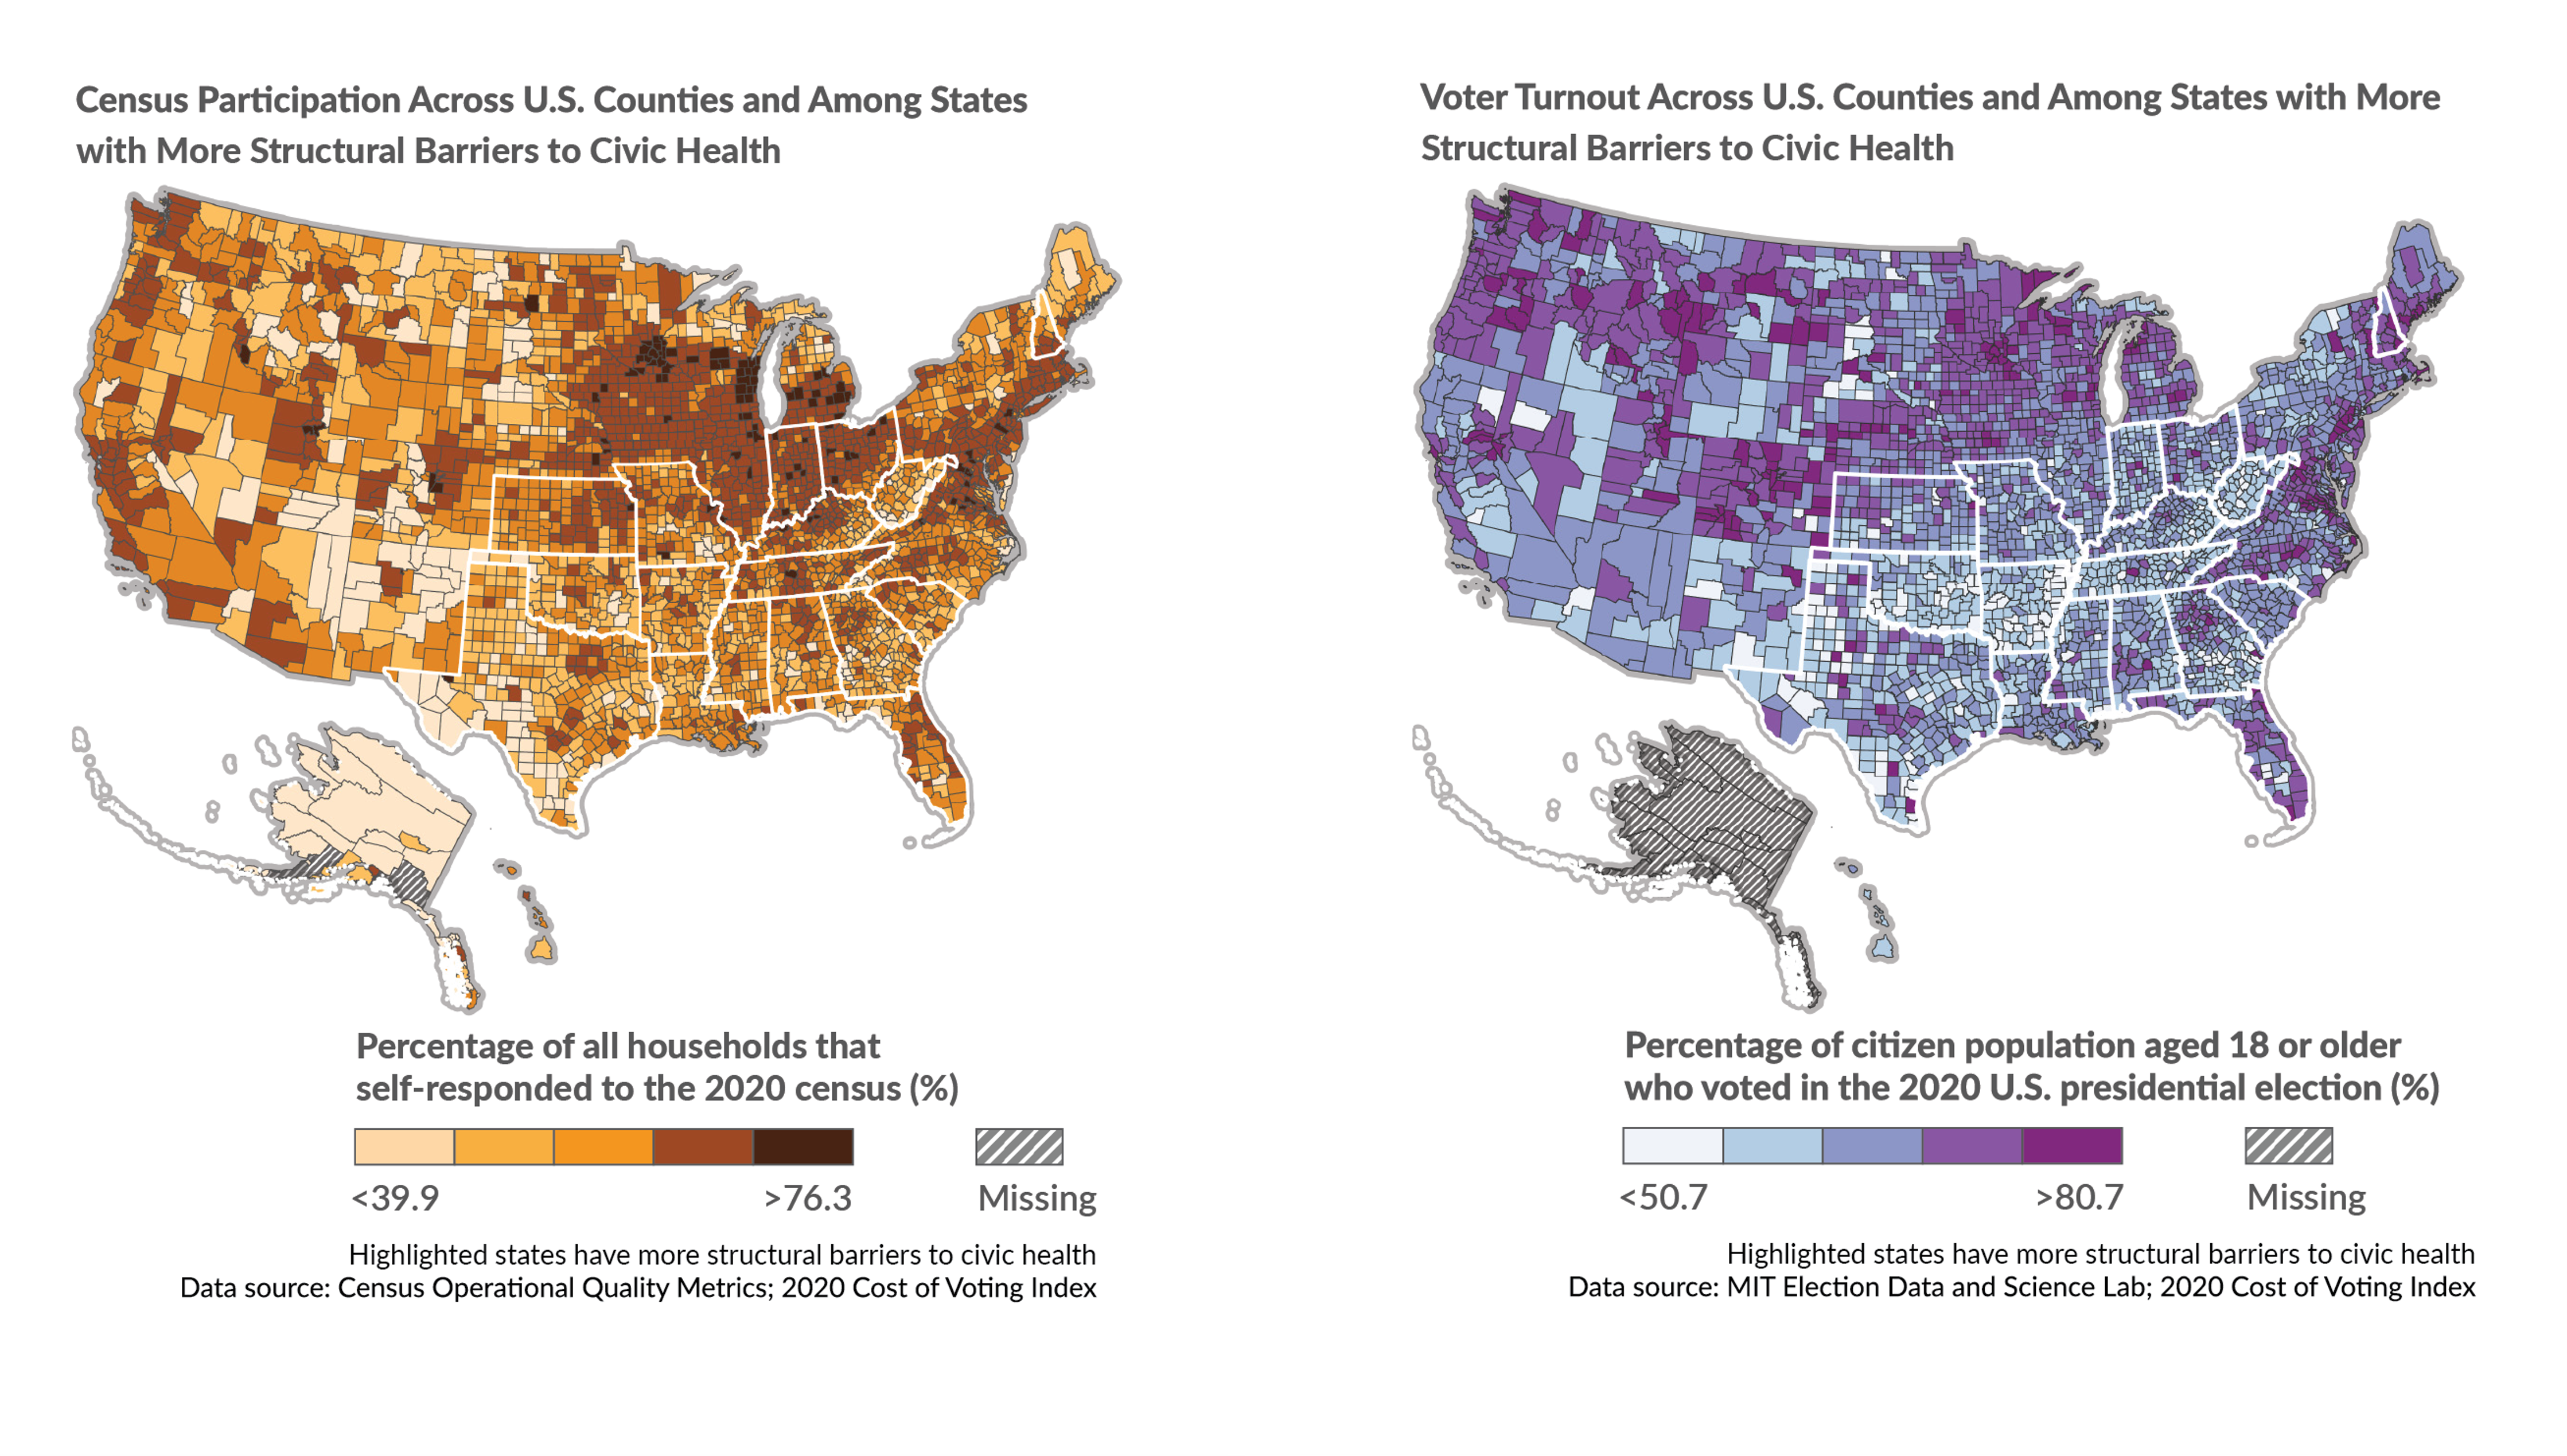 Census Participation and Voter Turnout Across U.S. Counties and Among States with More Barriers to Civic Health